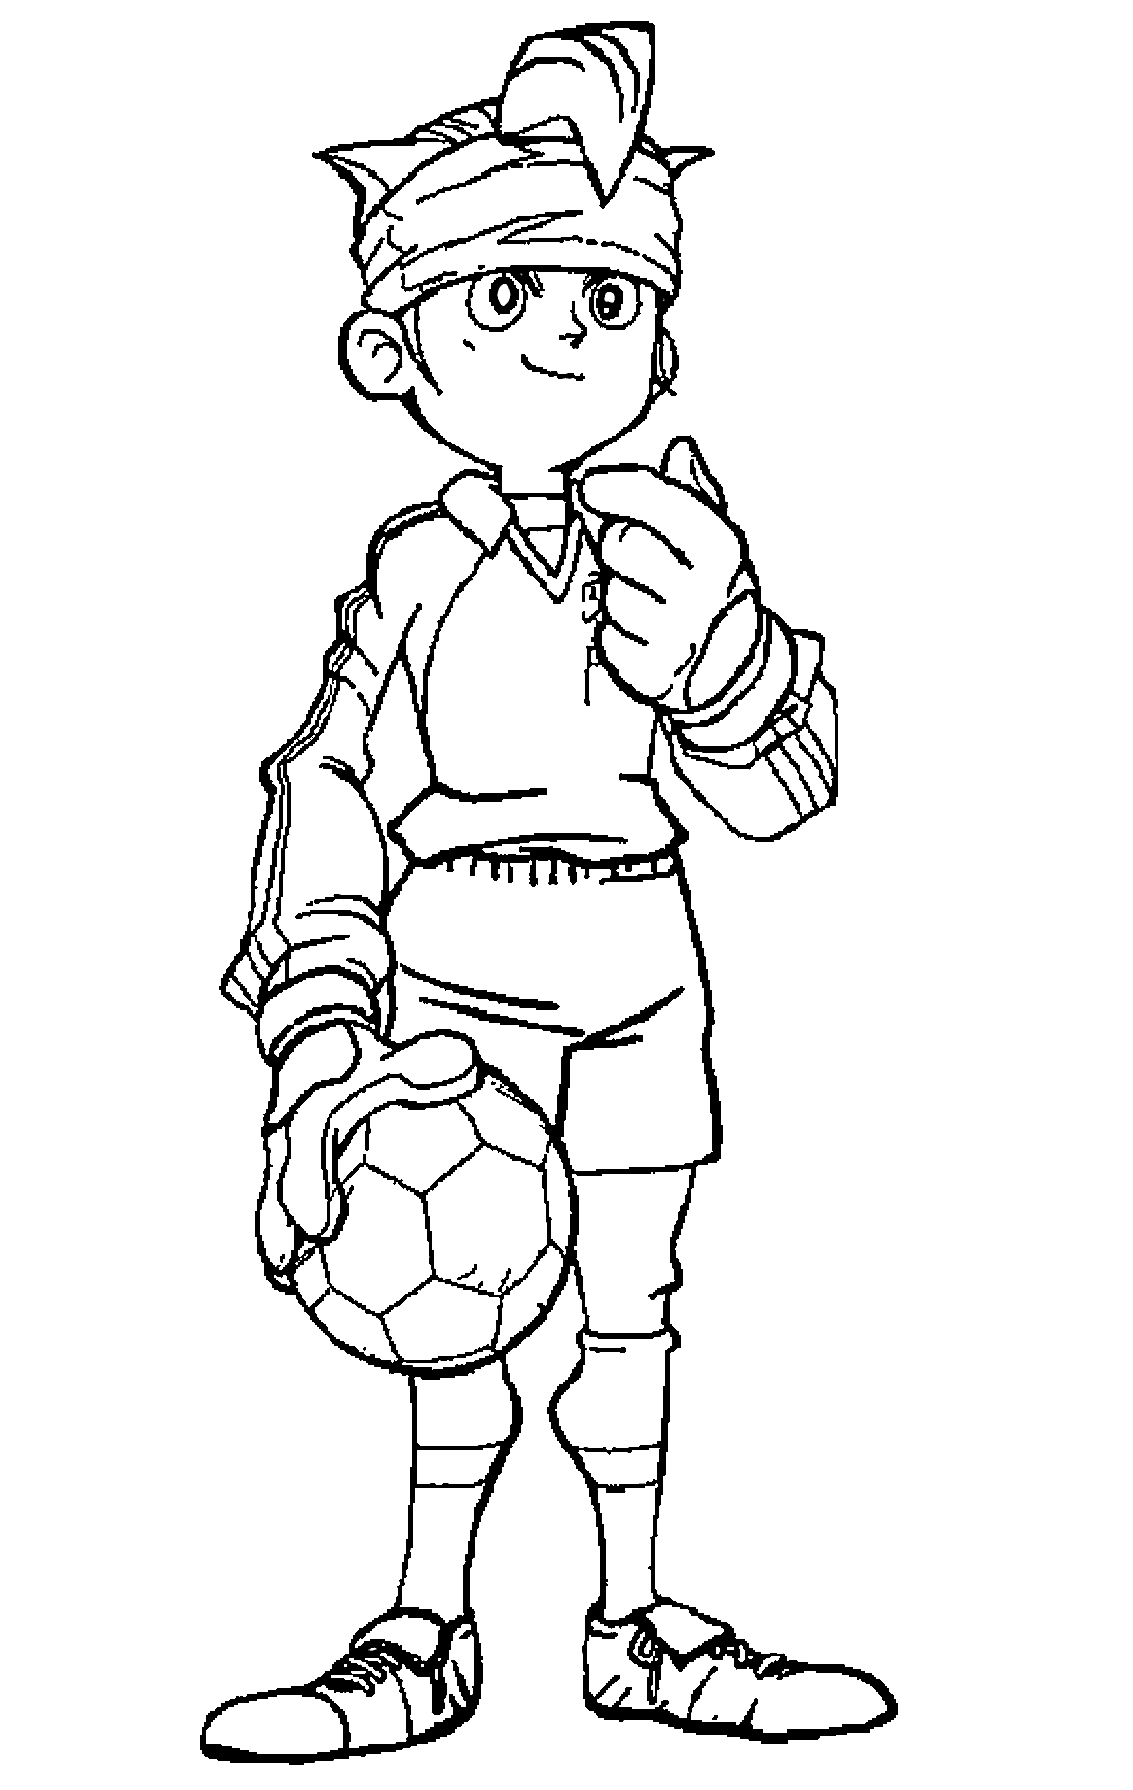 Image Inazuma Eleven to print and color